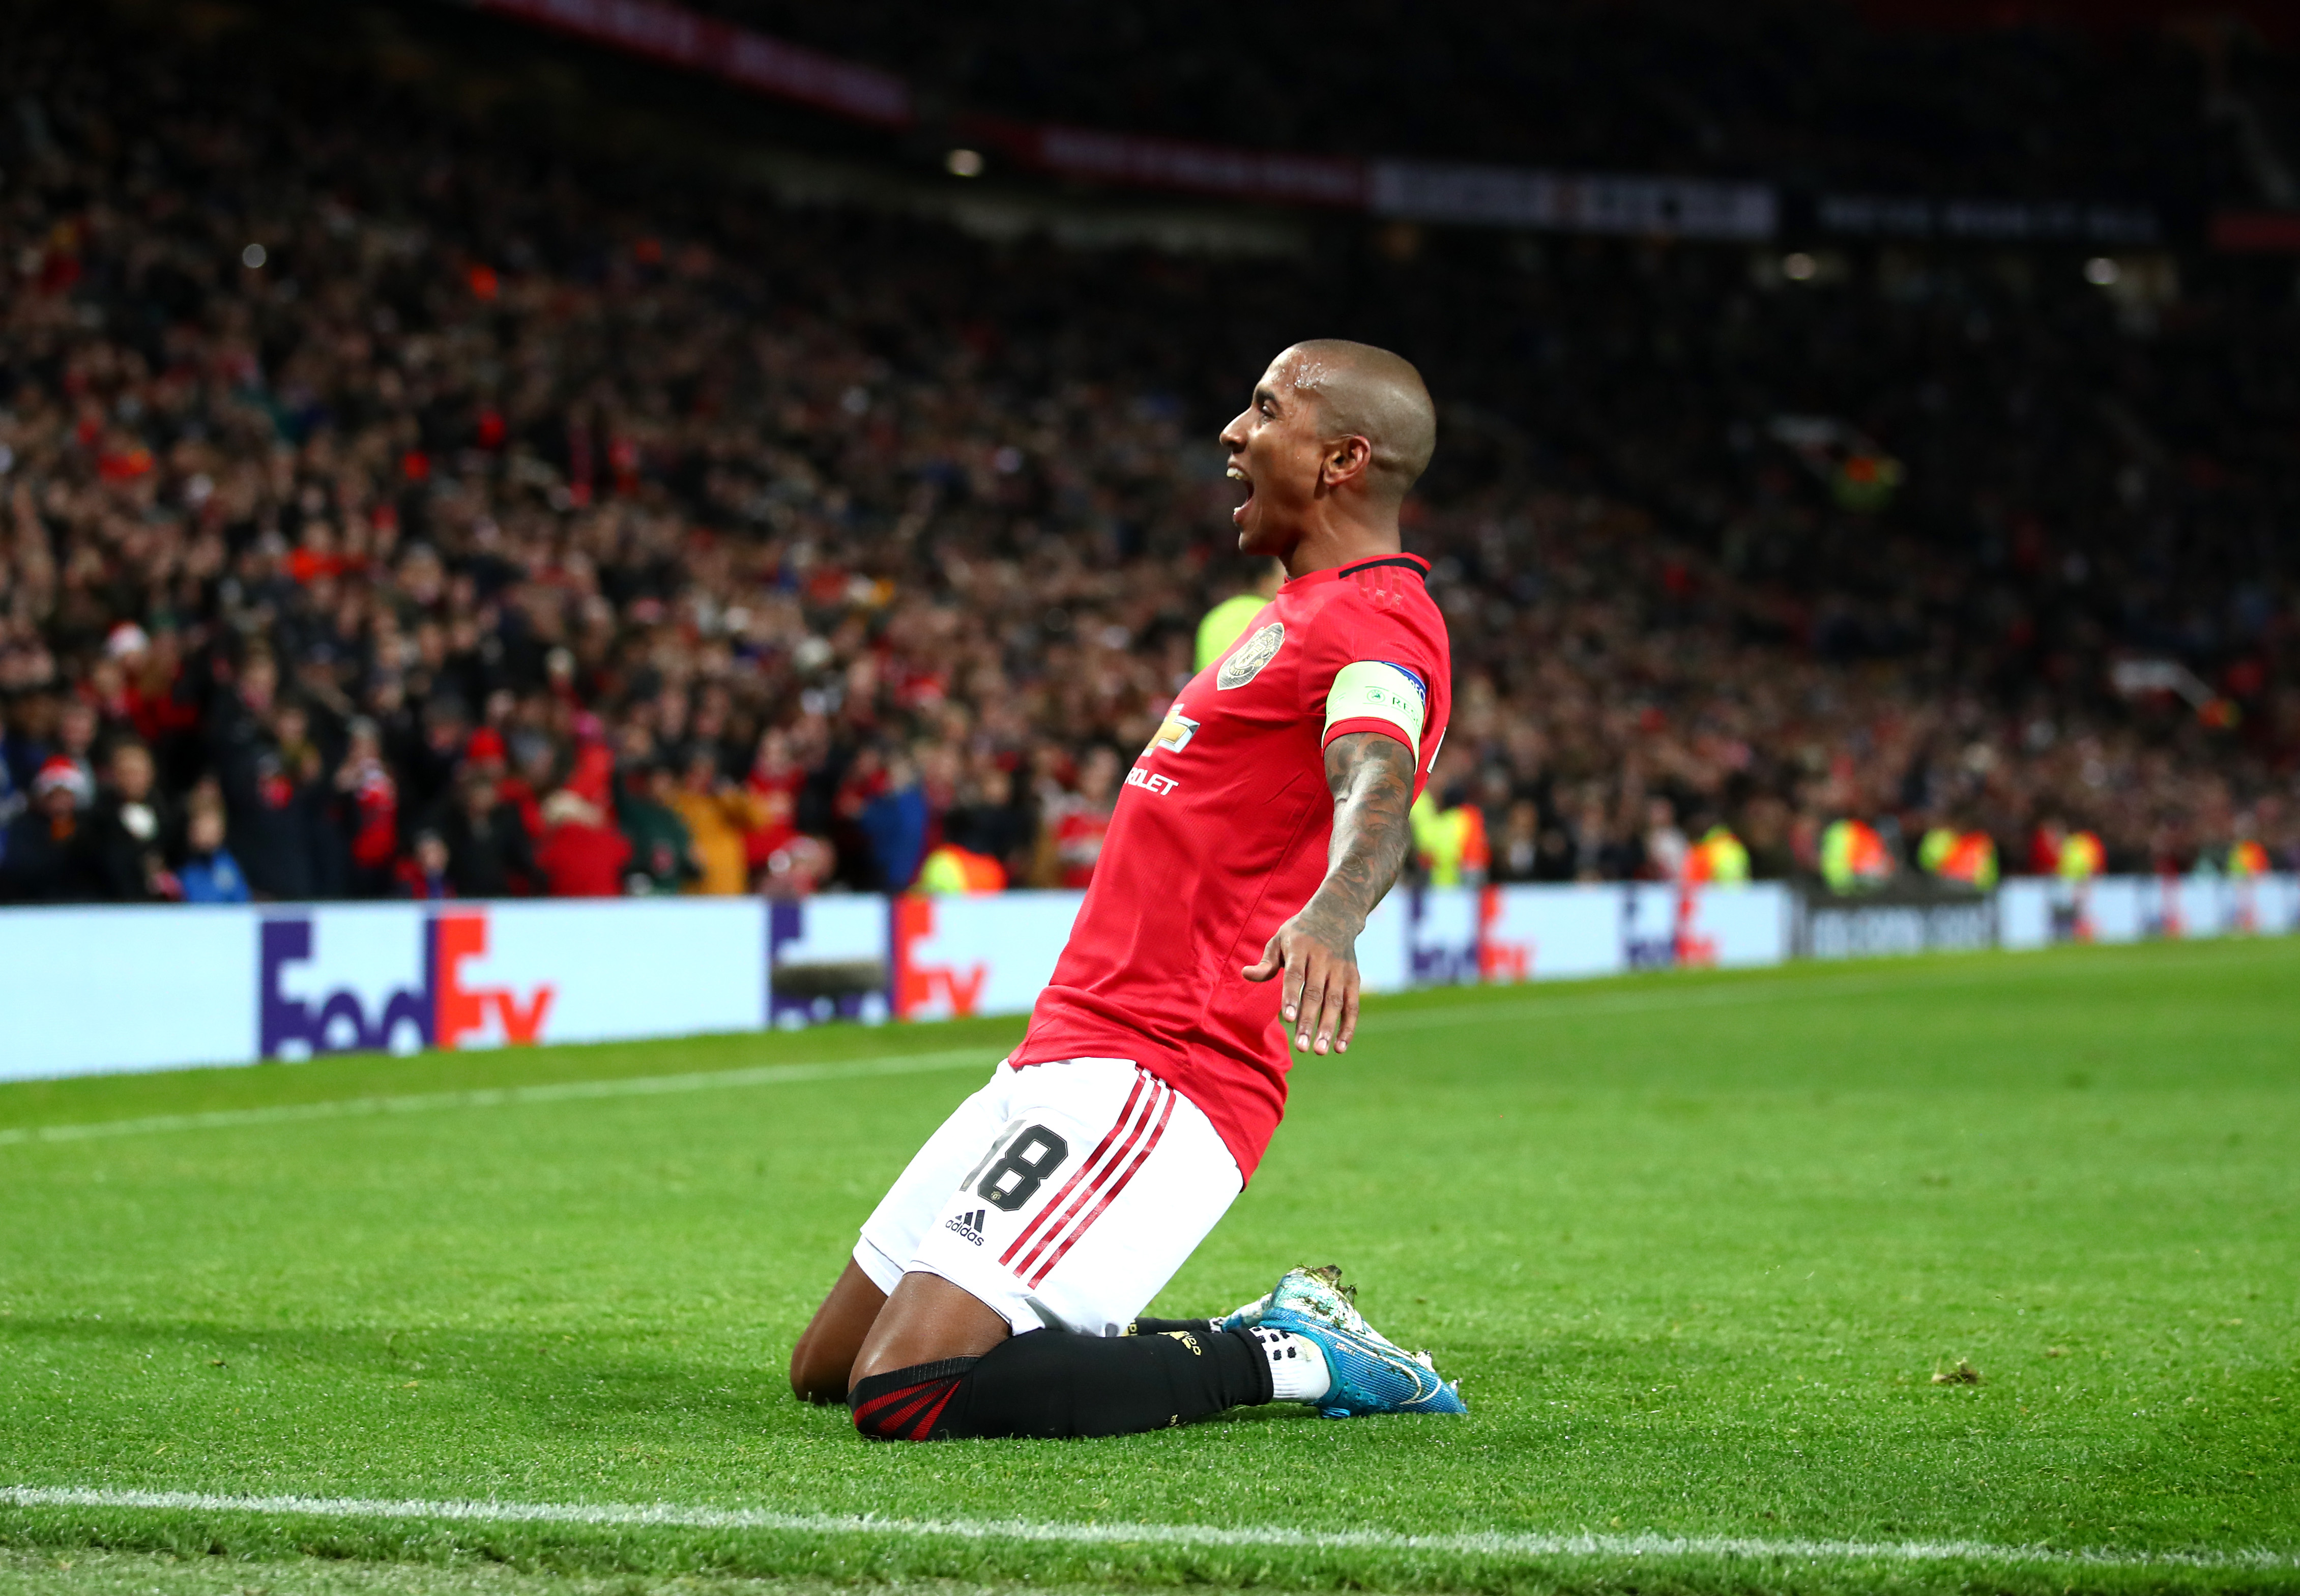 MANCHESTER, ENGLAND - DECEMBER 12: Ashley Young of Manchester United celebrates after scoring his team's first goal during the UEFA Europa League group L match between Manchester United and AZ Alkmaar at Old Trafford on December 12, 2019 in Manchester, United Kingdom. (Photo by Clive Brunskill/Getty Images)